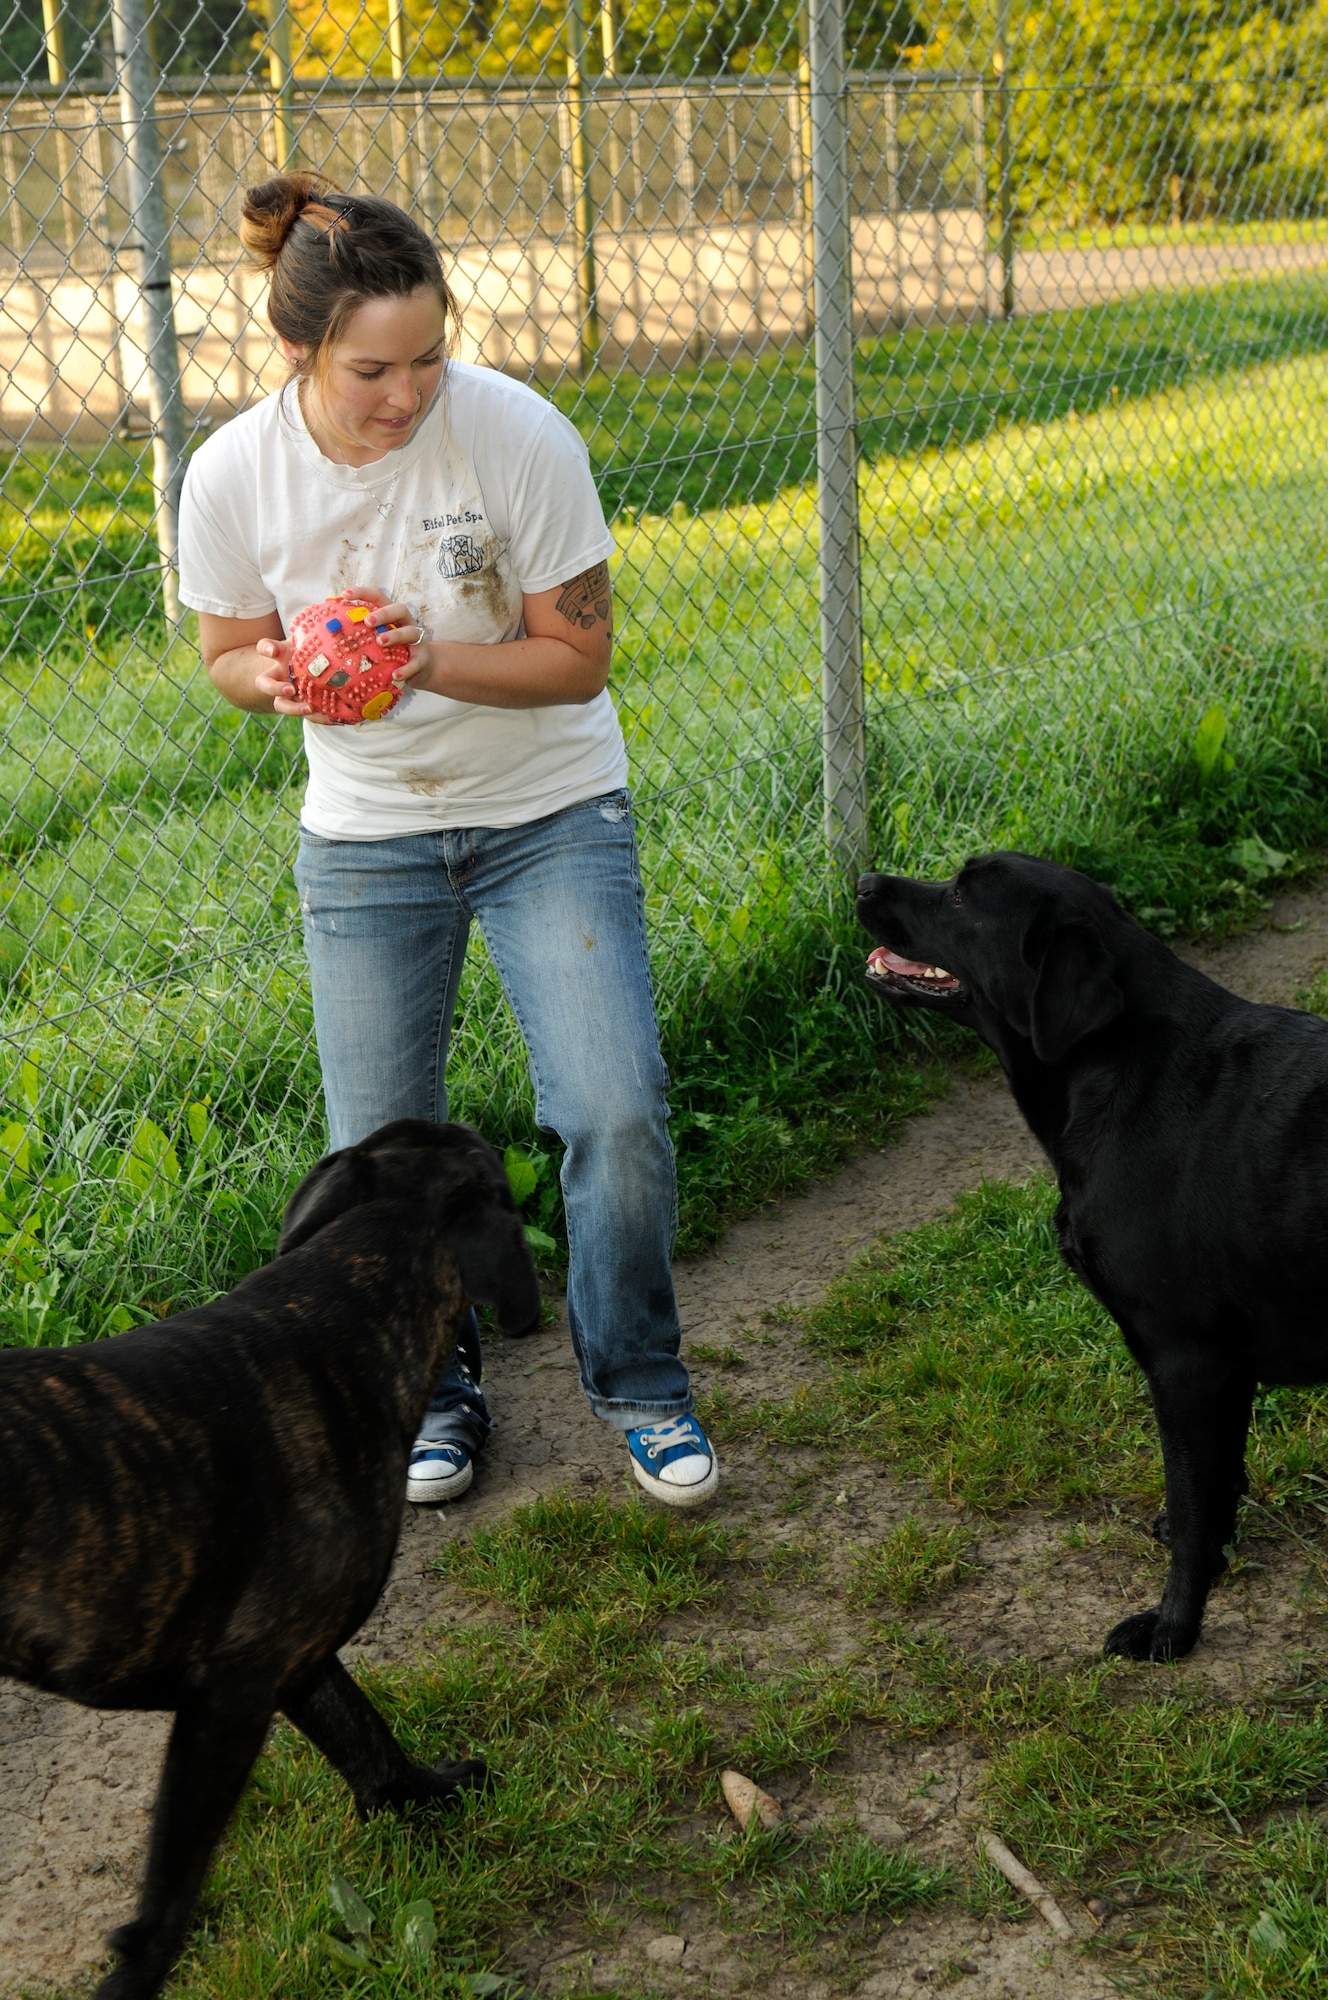 OBERWEIS, Germany -- Kimberly Barker, 52nd Force Support Squadron Pet Spa animal care taker, plays with Coco and Slugger Furman at the Pet Spa here Sept. 26. The dogs are walked twice a day and are put in indoor/outdoor kennels called runs which allow them to run around and play. To put dogs into doggy daycare or to board them, the animals are required to have rabies, distemper and bordetella vaccinations before staying at the Pet Spa. (U.S. Air Force photo/Airman 1st Class Brittney Frees)